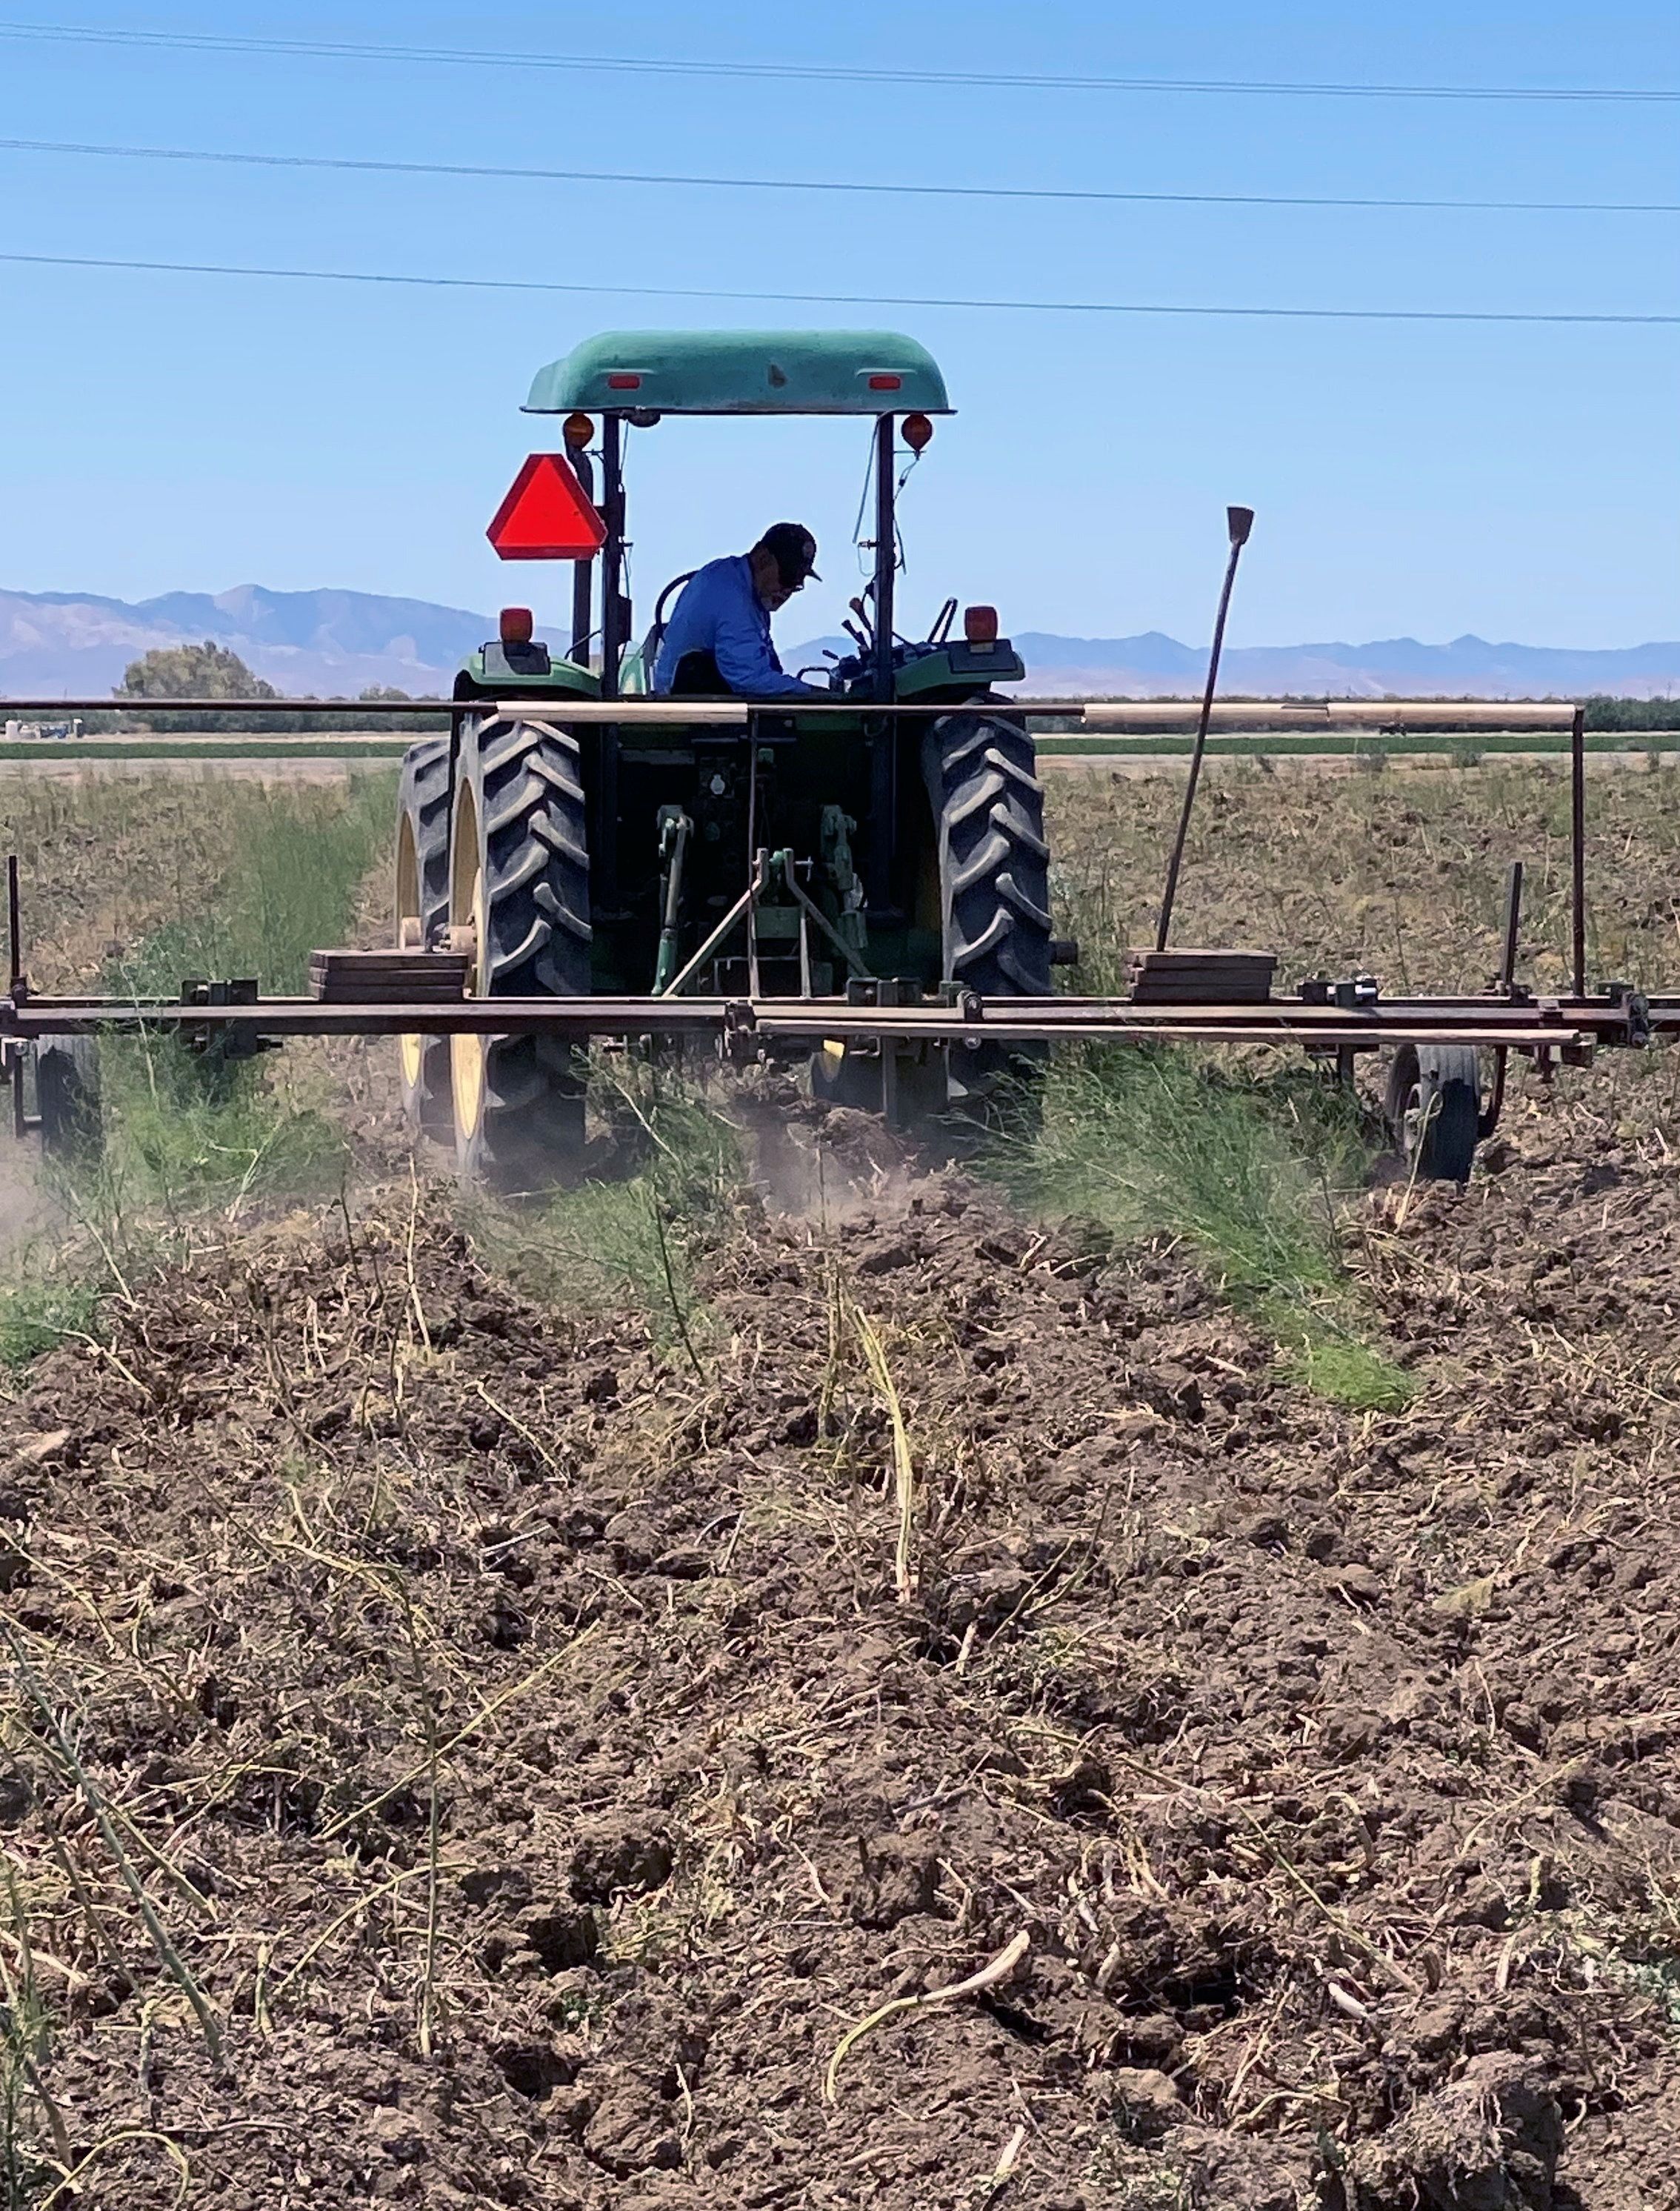 Tractor plows asparagus plants destroyed due to the lack of water in Firebaugh, California